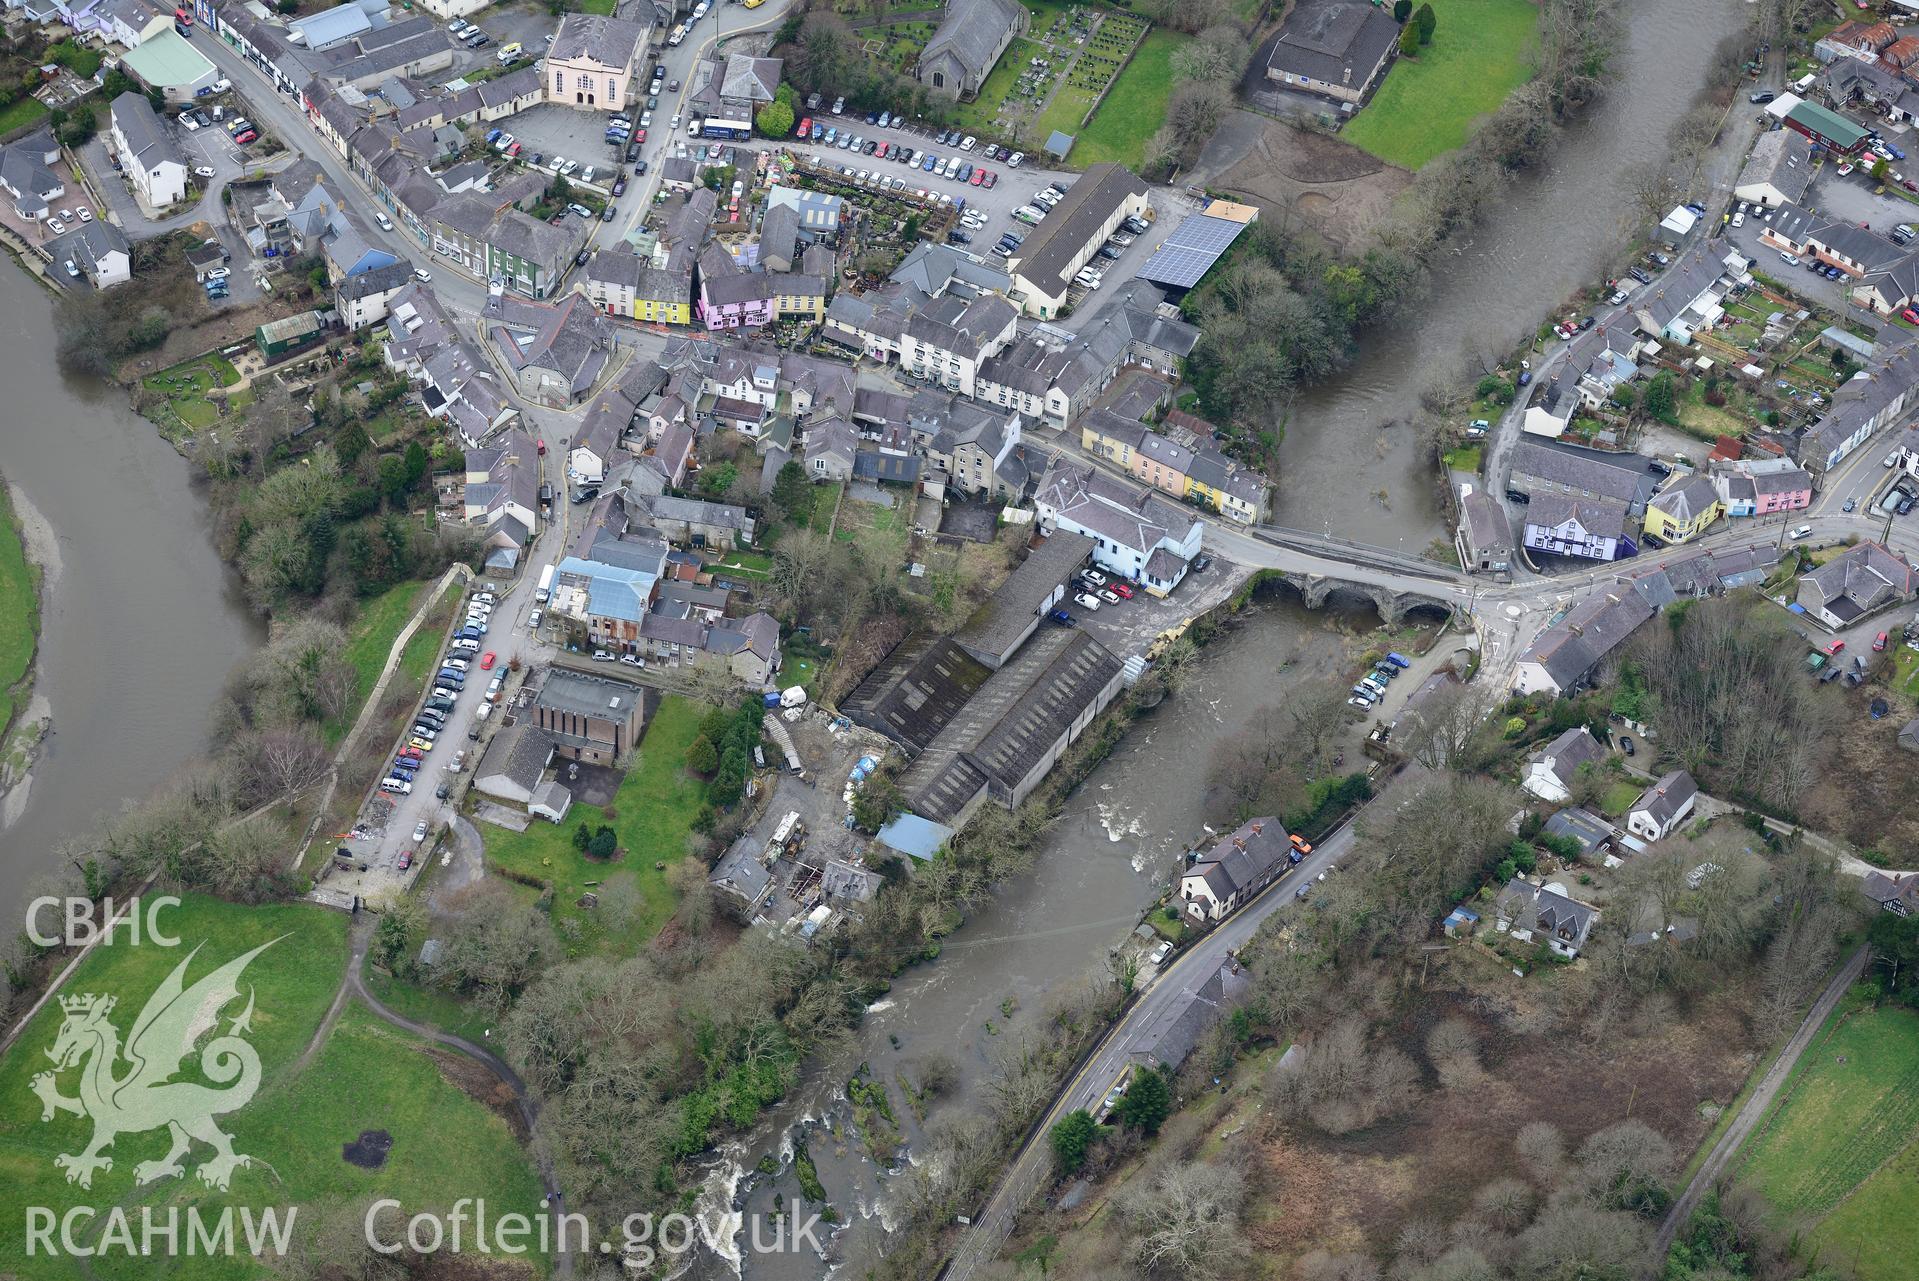 Newcastle Emlyn bridge, Newcastle Emlyn. Oblique aerial photograph taken during the Royal Commission's programme of archaeological aerial reconnaissance by Toby Driver on 13th March 2015.